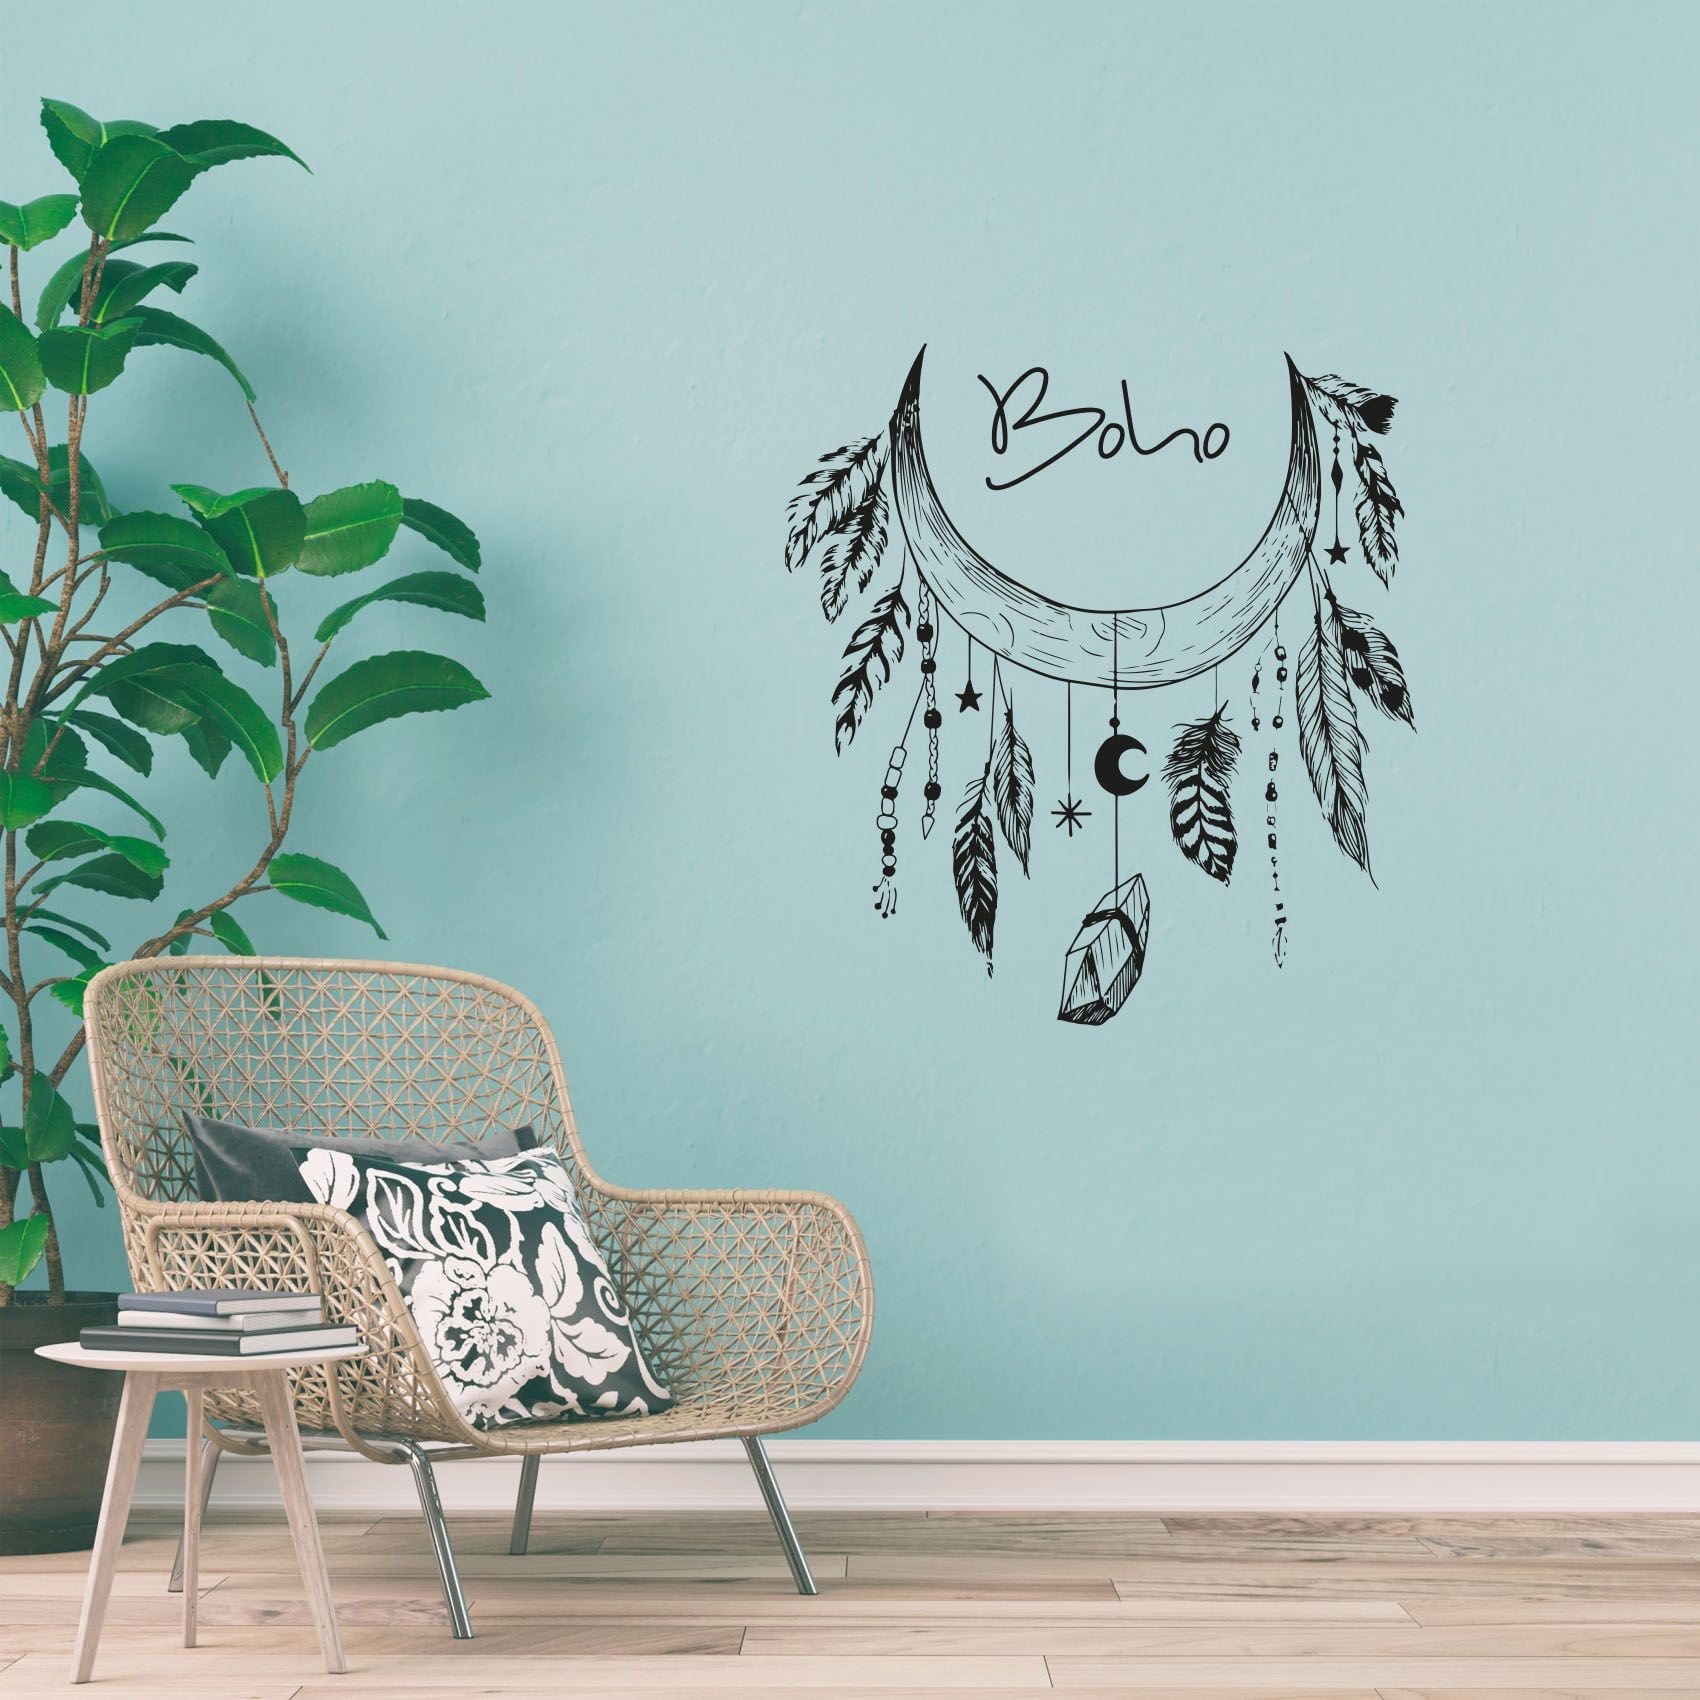 baby stickers baby girl decal Childrens wall sticker Bohemian style decor vinyl sticker Wall decal art stickers Boho Quote Love Dream